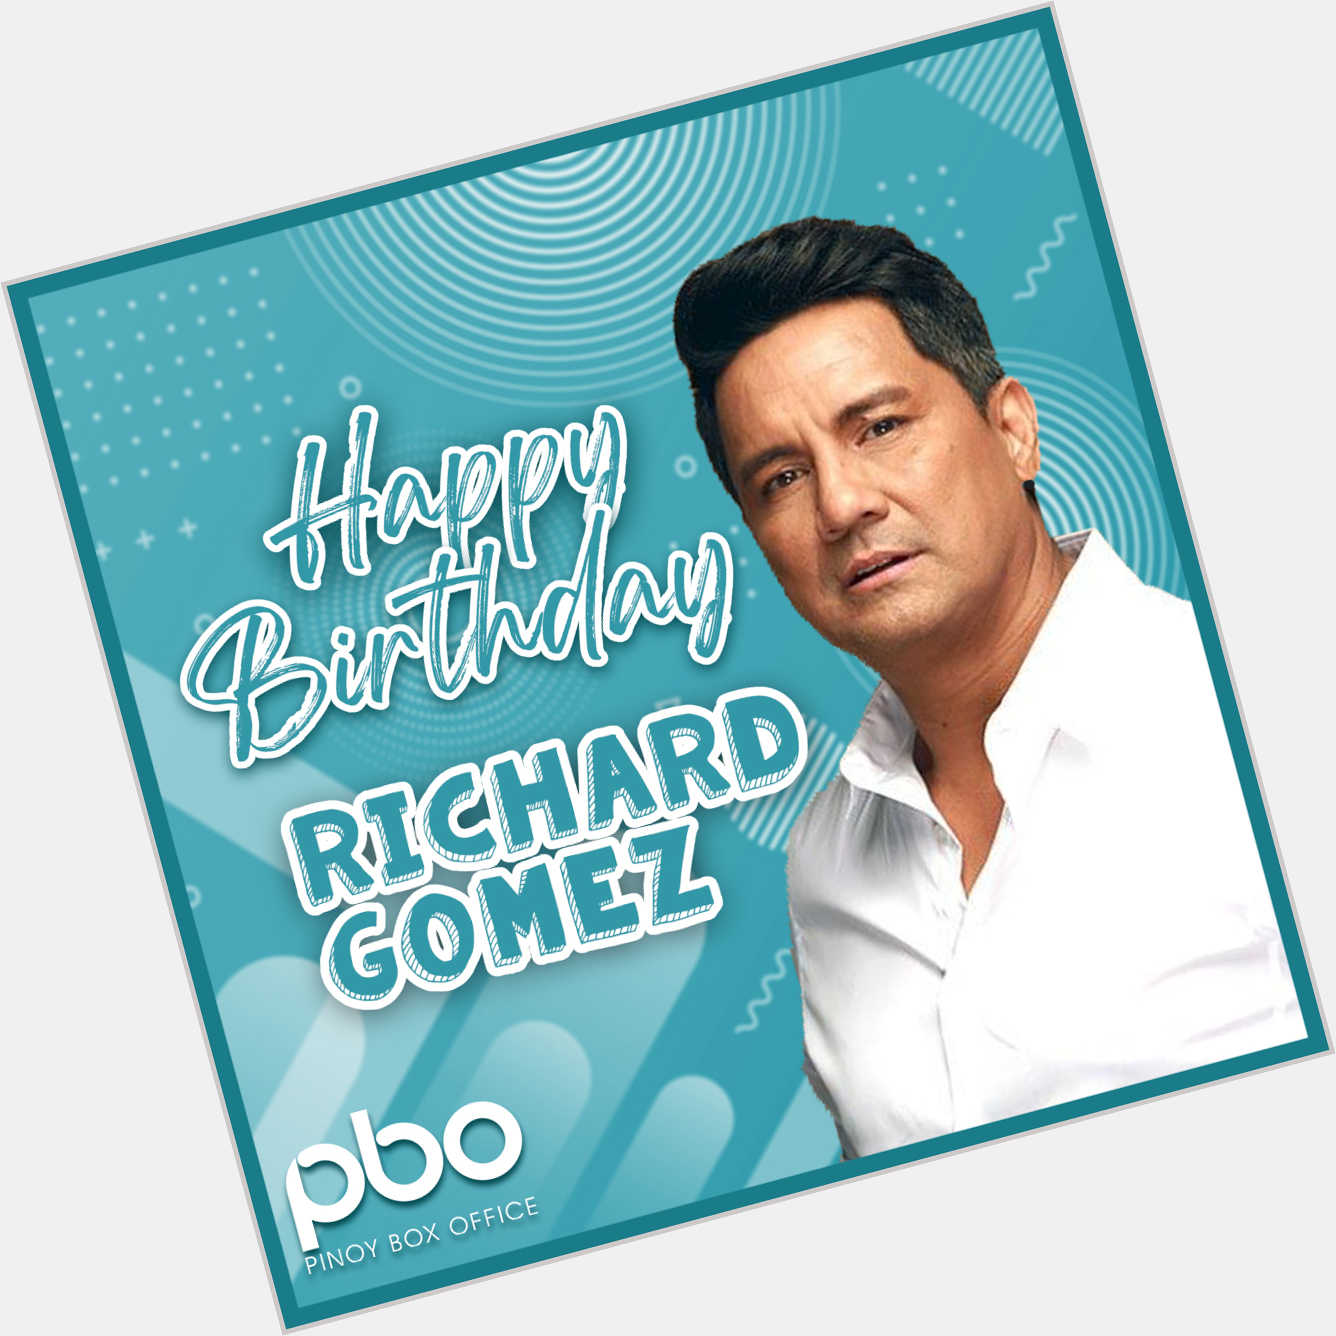 Happy birthday, Richard Gomez! Wishing you a day filled with happiness and plenty of love! 